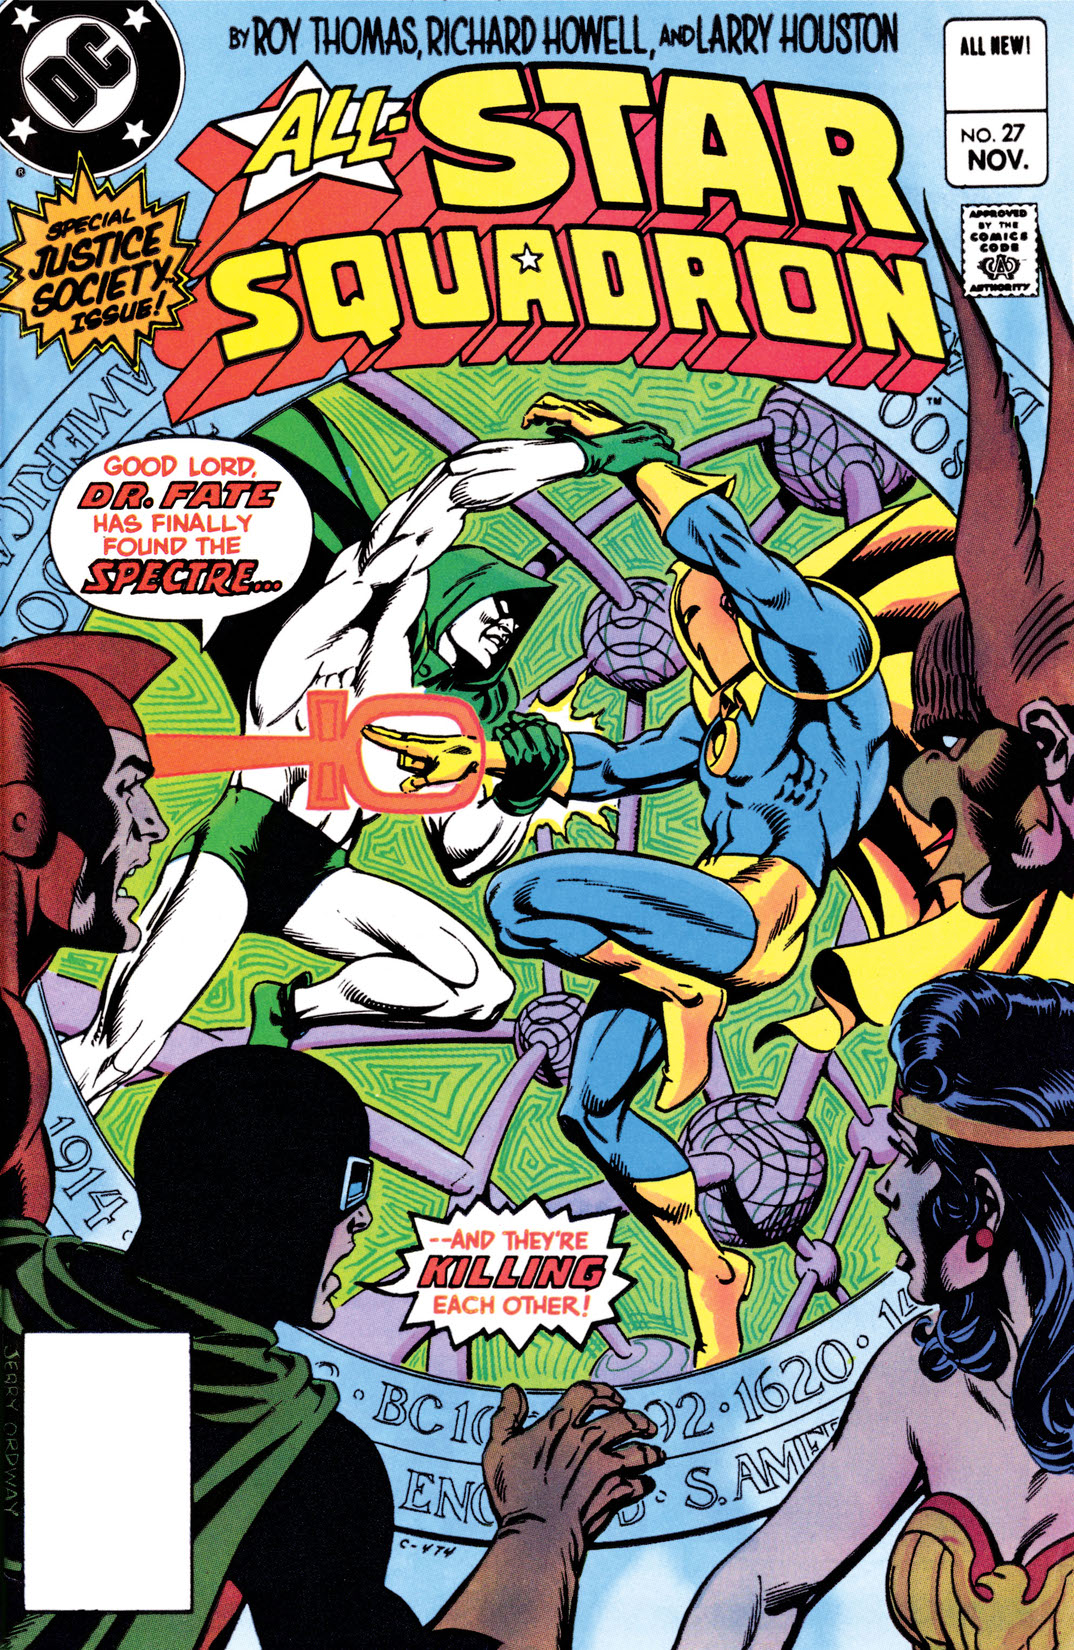 All-Star Squadron #27 preview images